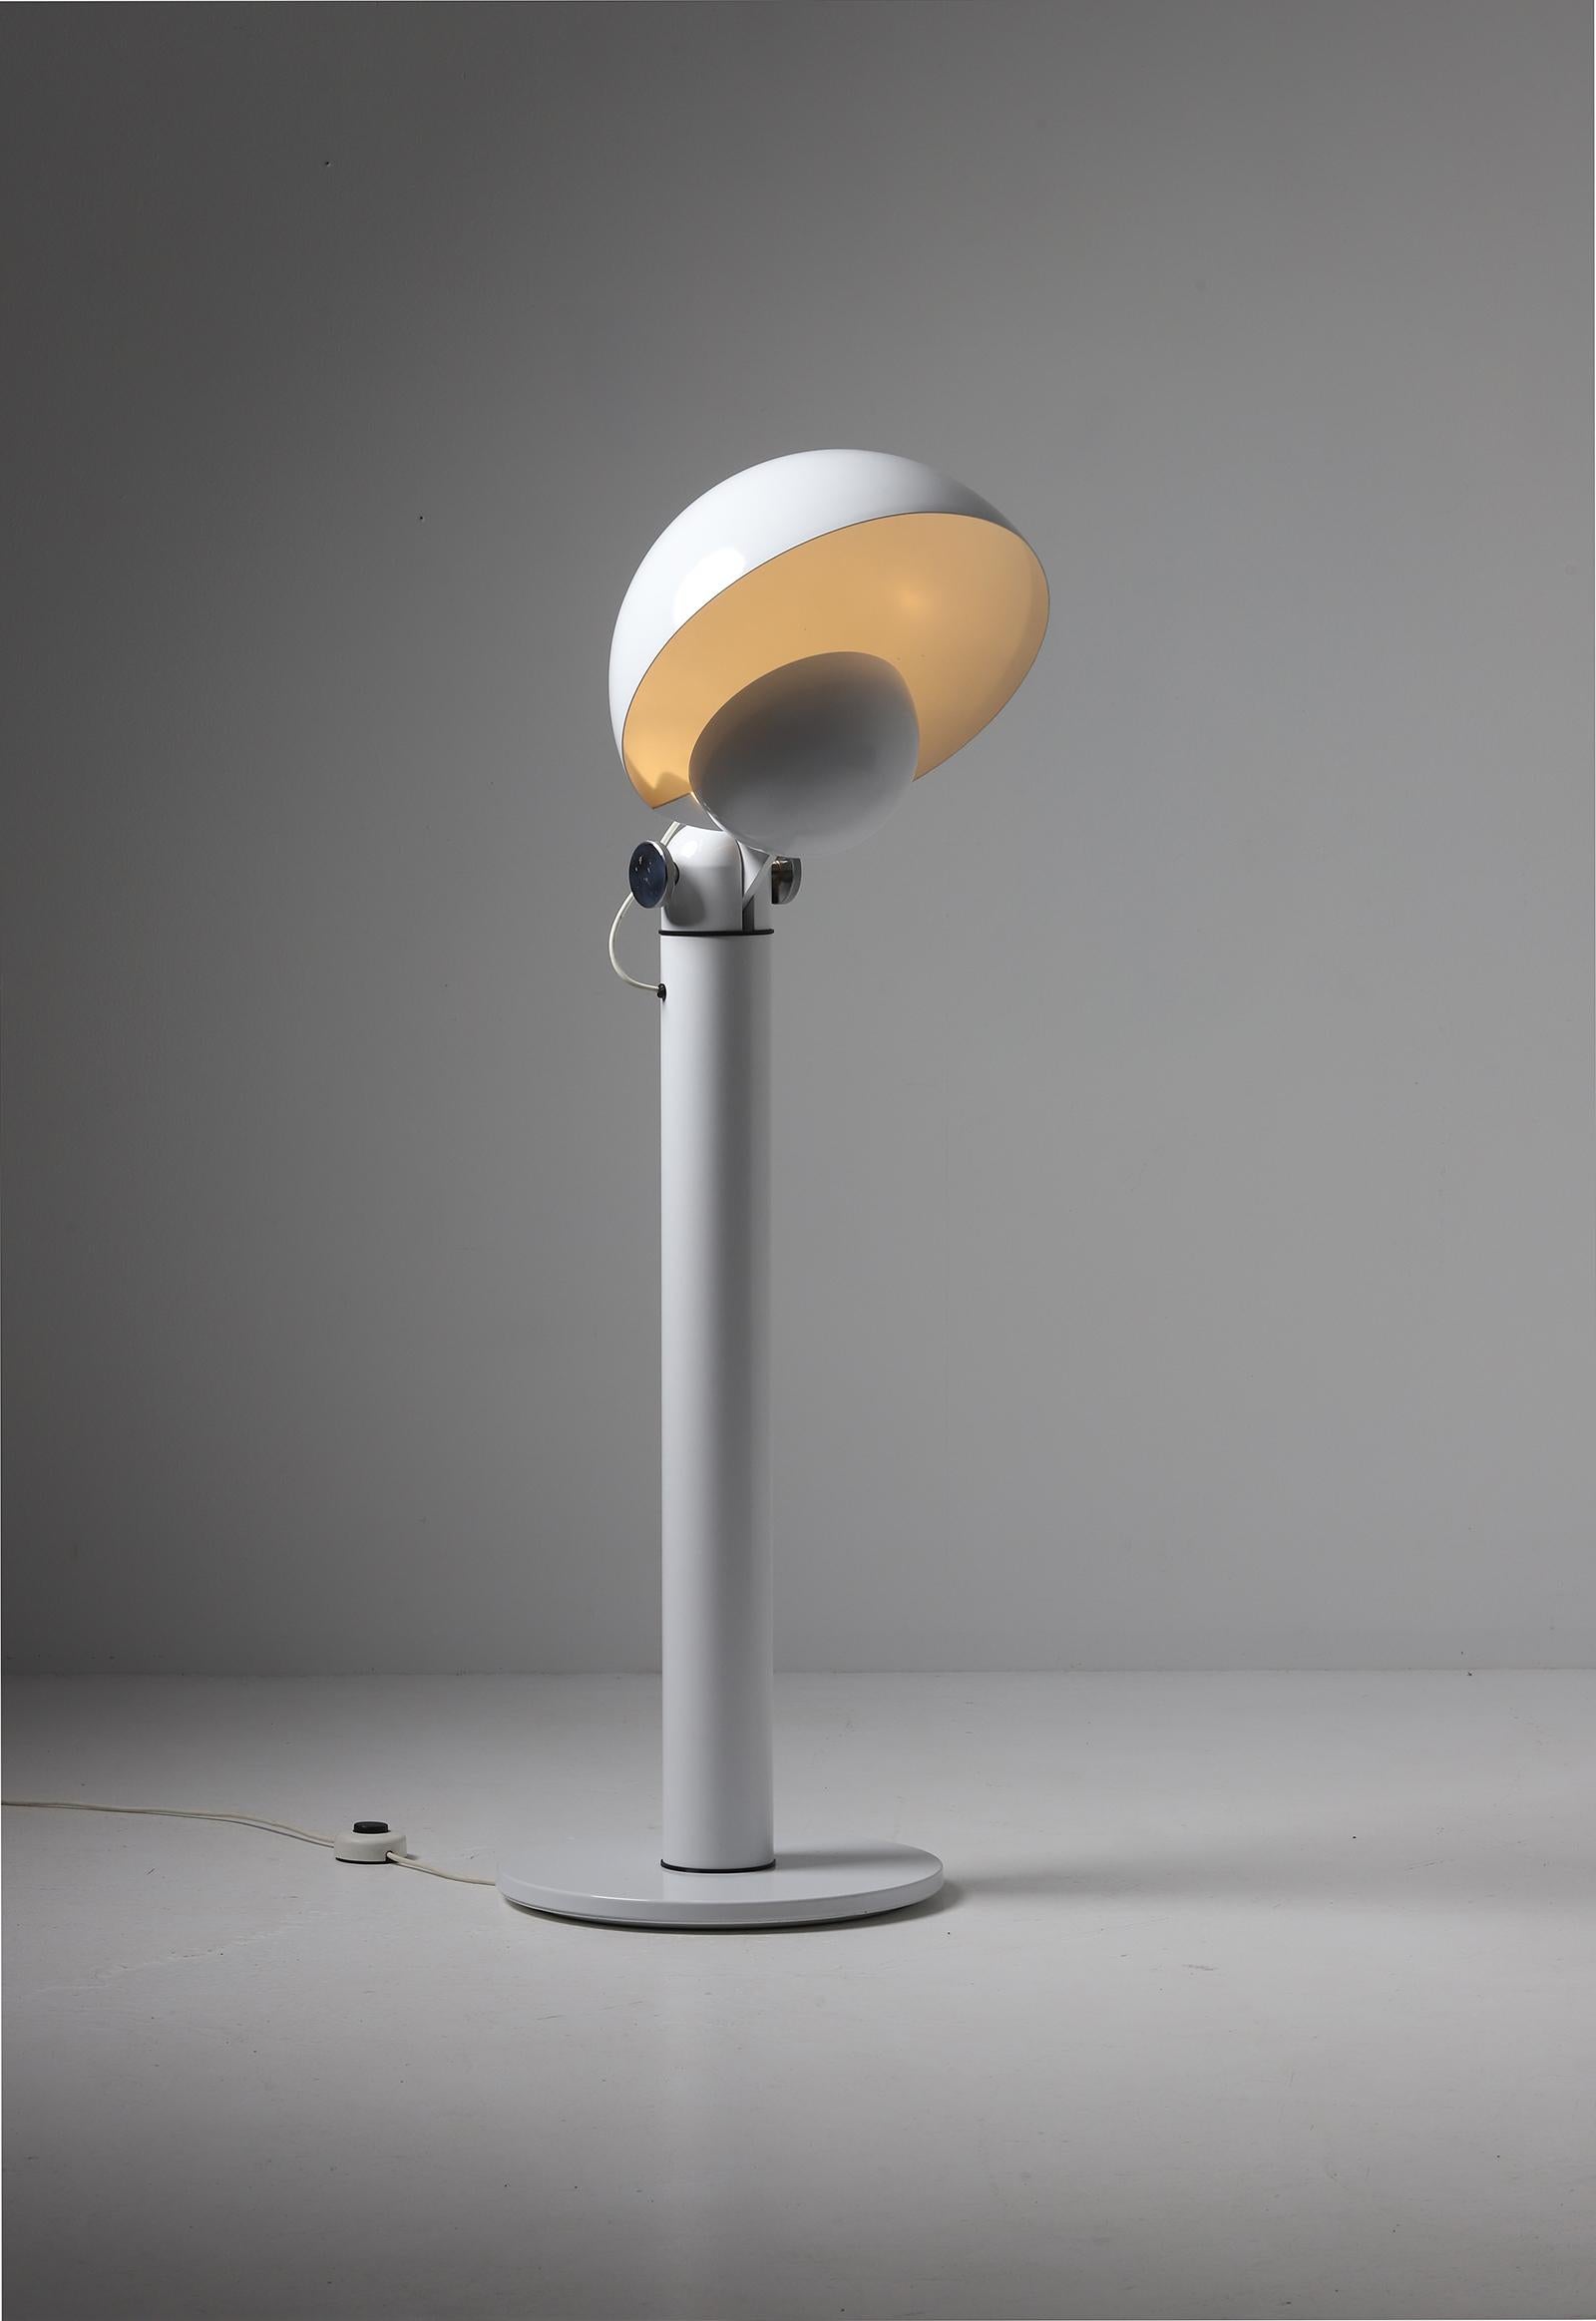 Cuffia floor lamp designed by Francesco Buzzi for Bieffeplast in 1969. This postmodern lamp is made out of a white lacquered aluminum with two adjustable shades who can turn 180 degrees. The use of the two shades gives the lamp a highly decorative